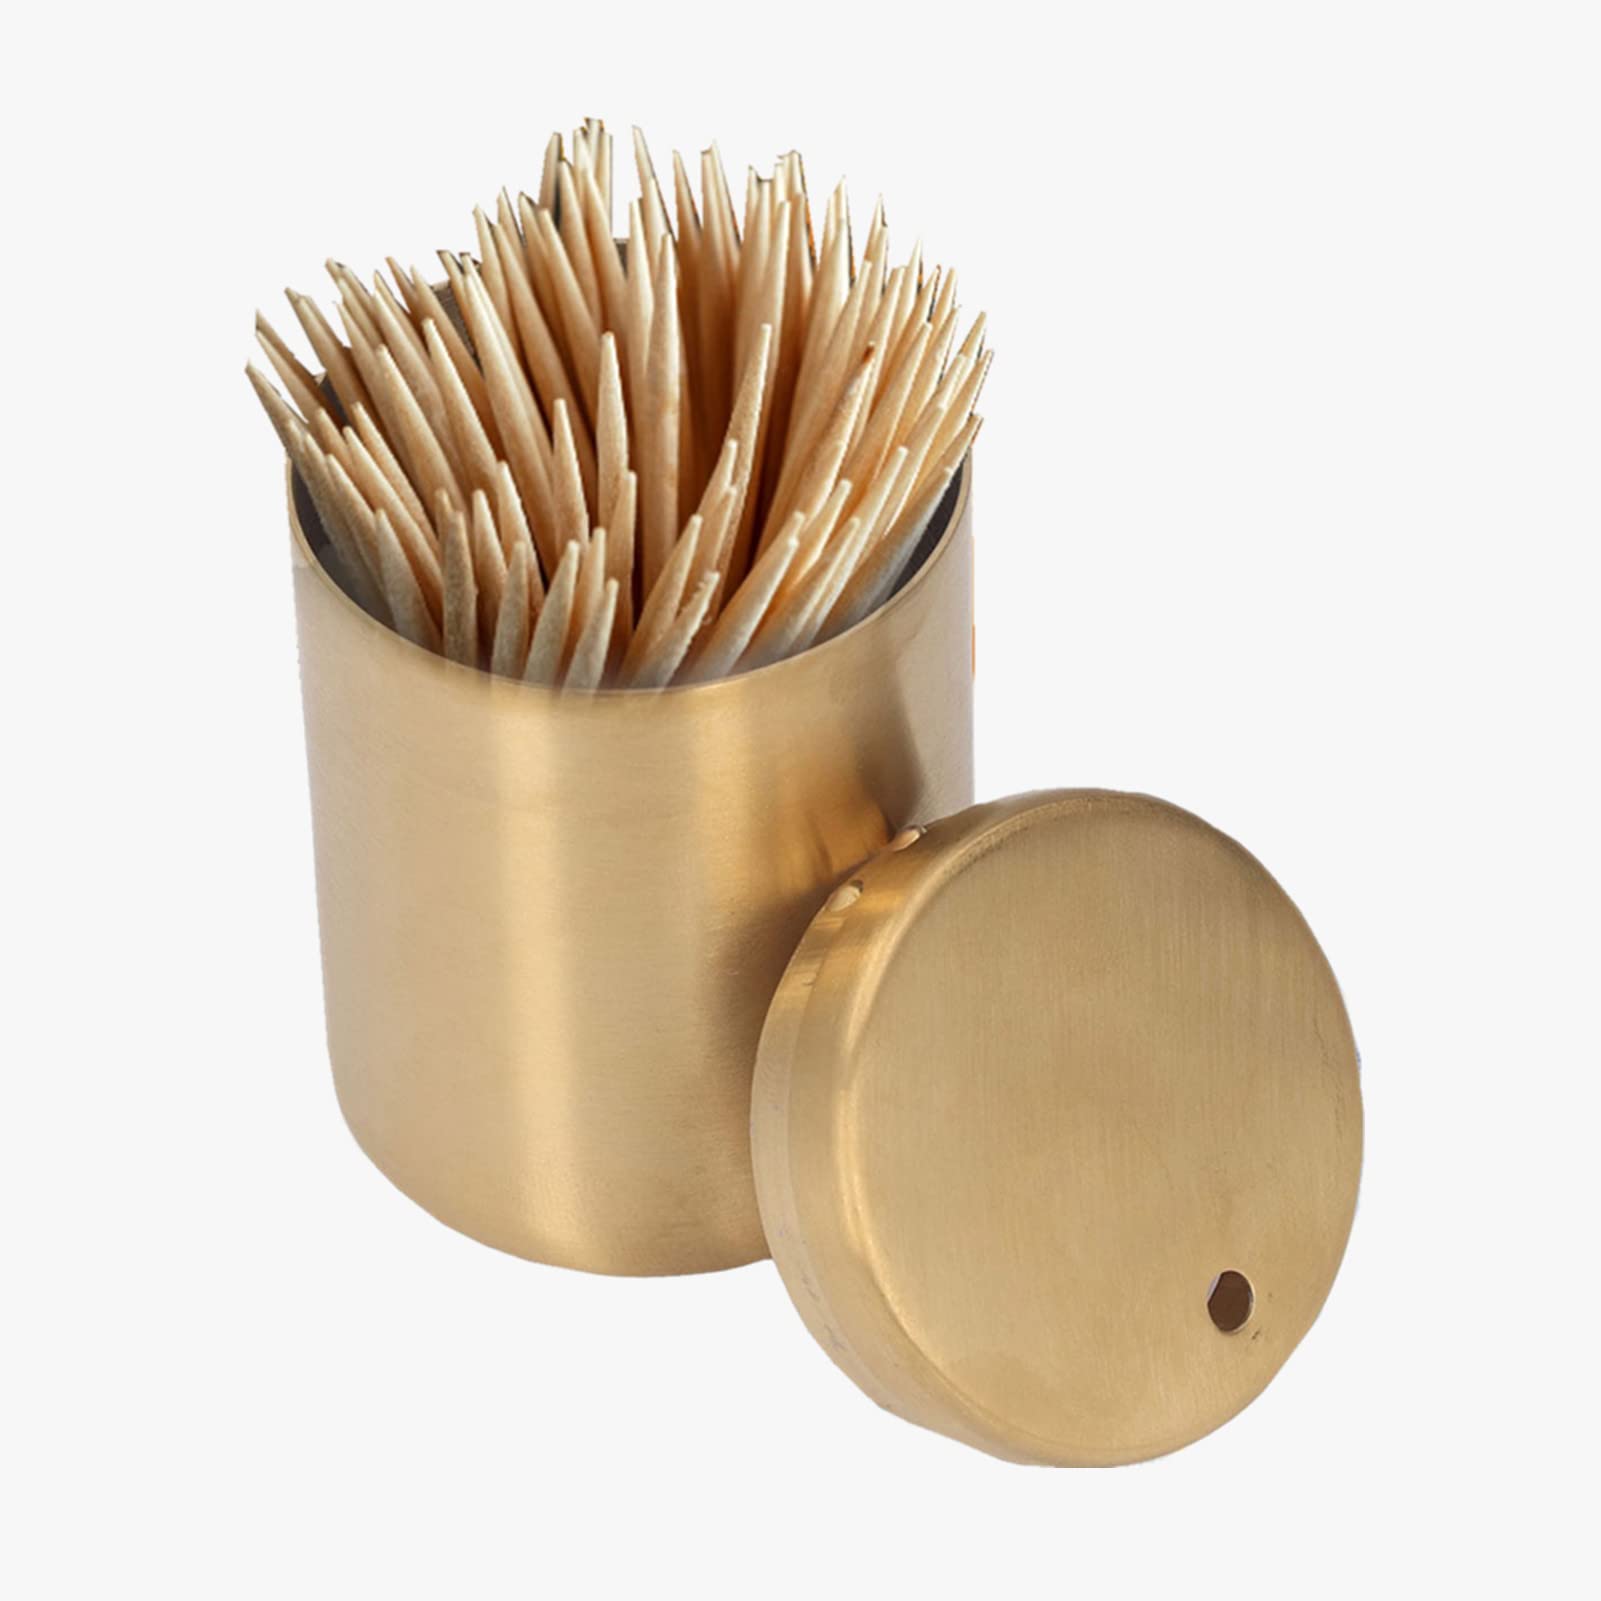 Toothpick Holder, 3.1x2.2in Stainless Steel Toothpick Holder Dispenser Pocket Toothpick Holder Metal Toothpick Storage Box for Table, Restaurant, Travel(Gold)